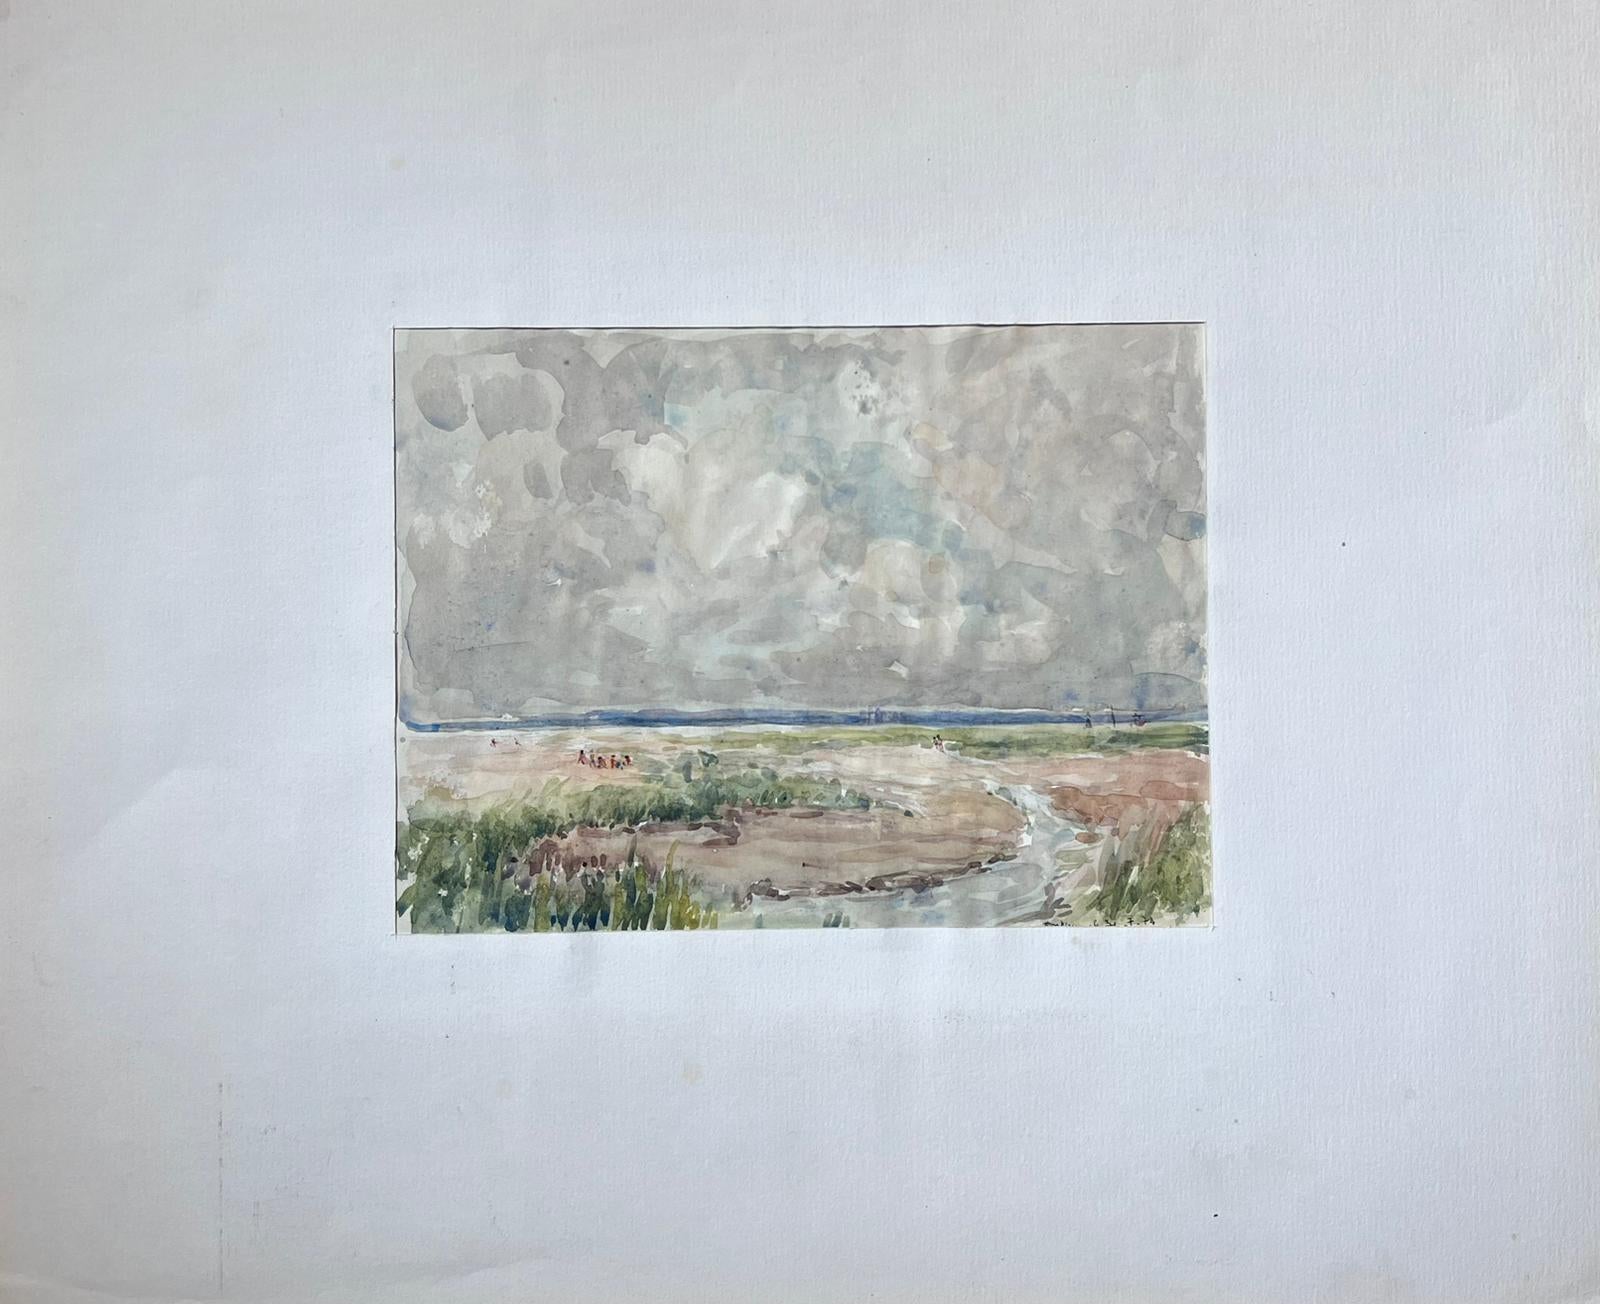 Jean La Forgue (French 1901-1975) signed watercolour on paper, mounted in a card frame
inscribed verso
card frame: 15 x 18 inches
painting: 7 x 10 inches
provenance: the artists estate, France
condition: very good and sound condition; there are